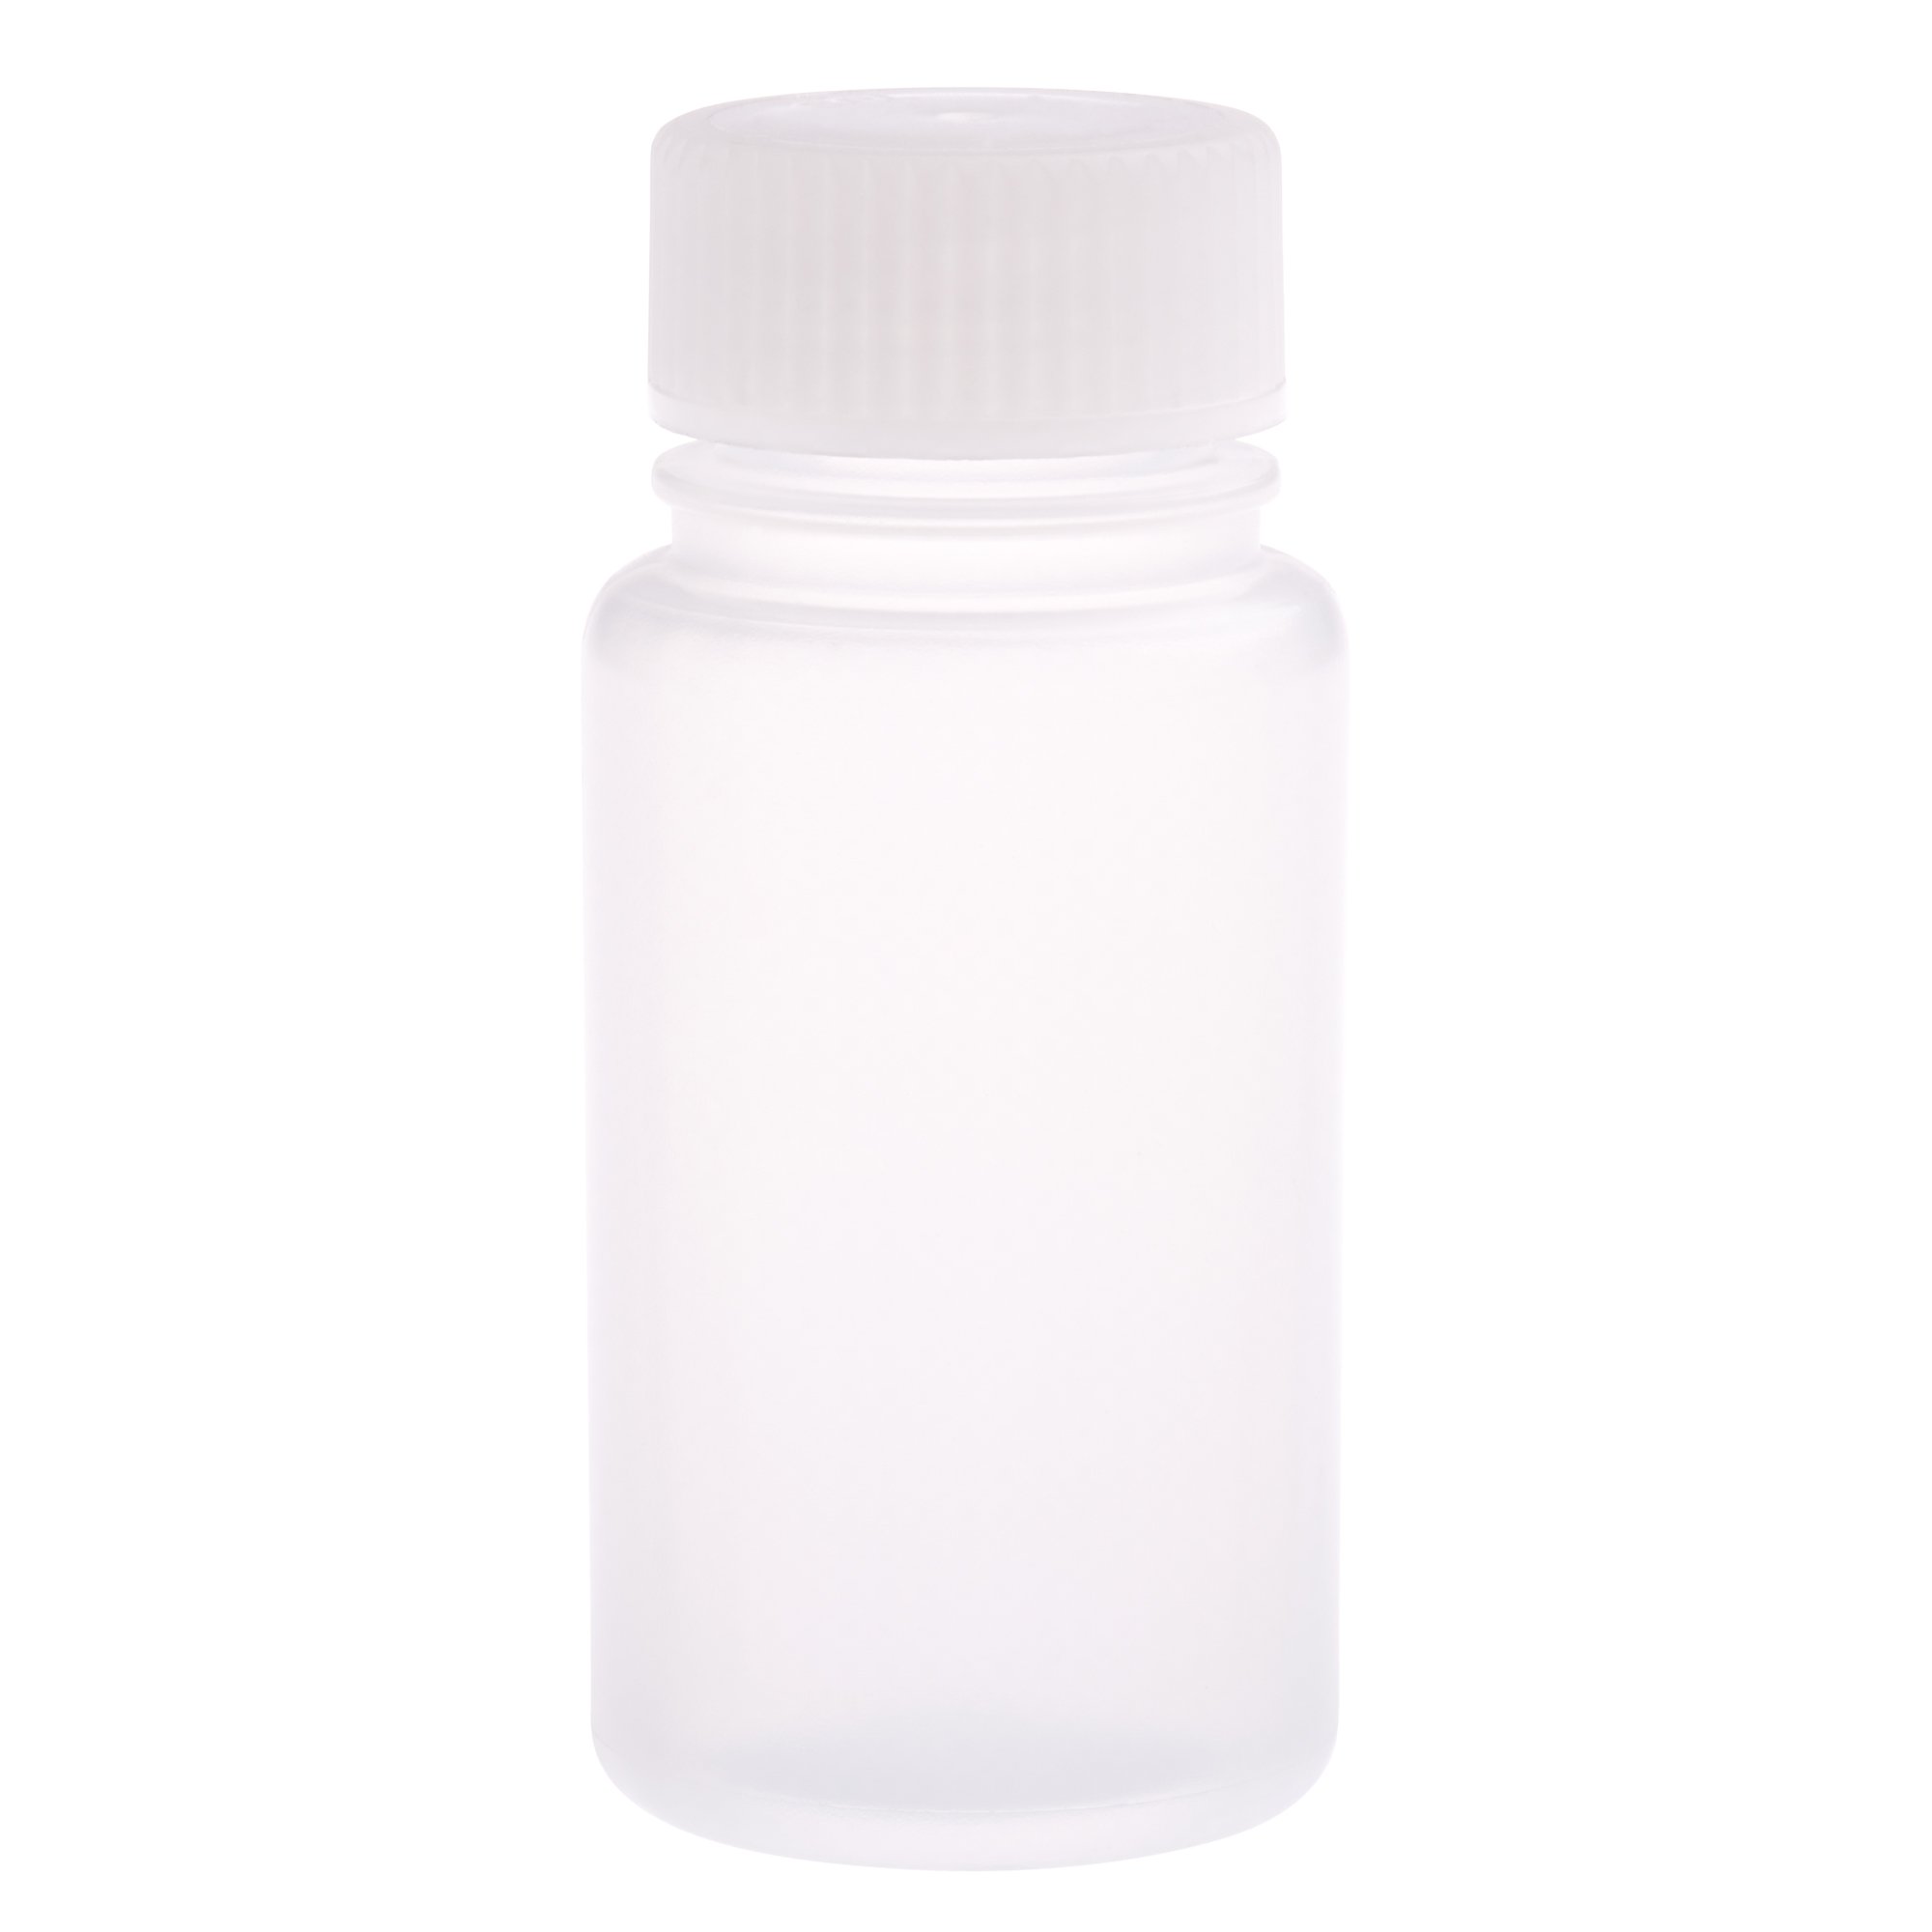 Celltreat 229794 60mL Wide Mouth Bottle, Round, PP, Non-sterile